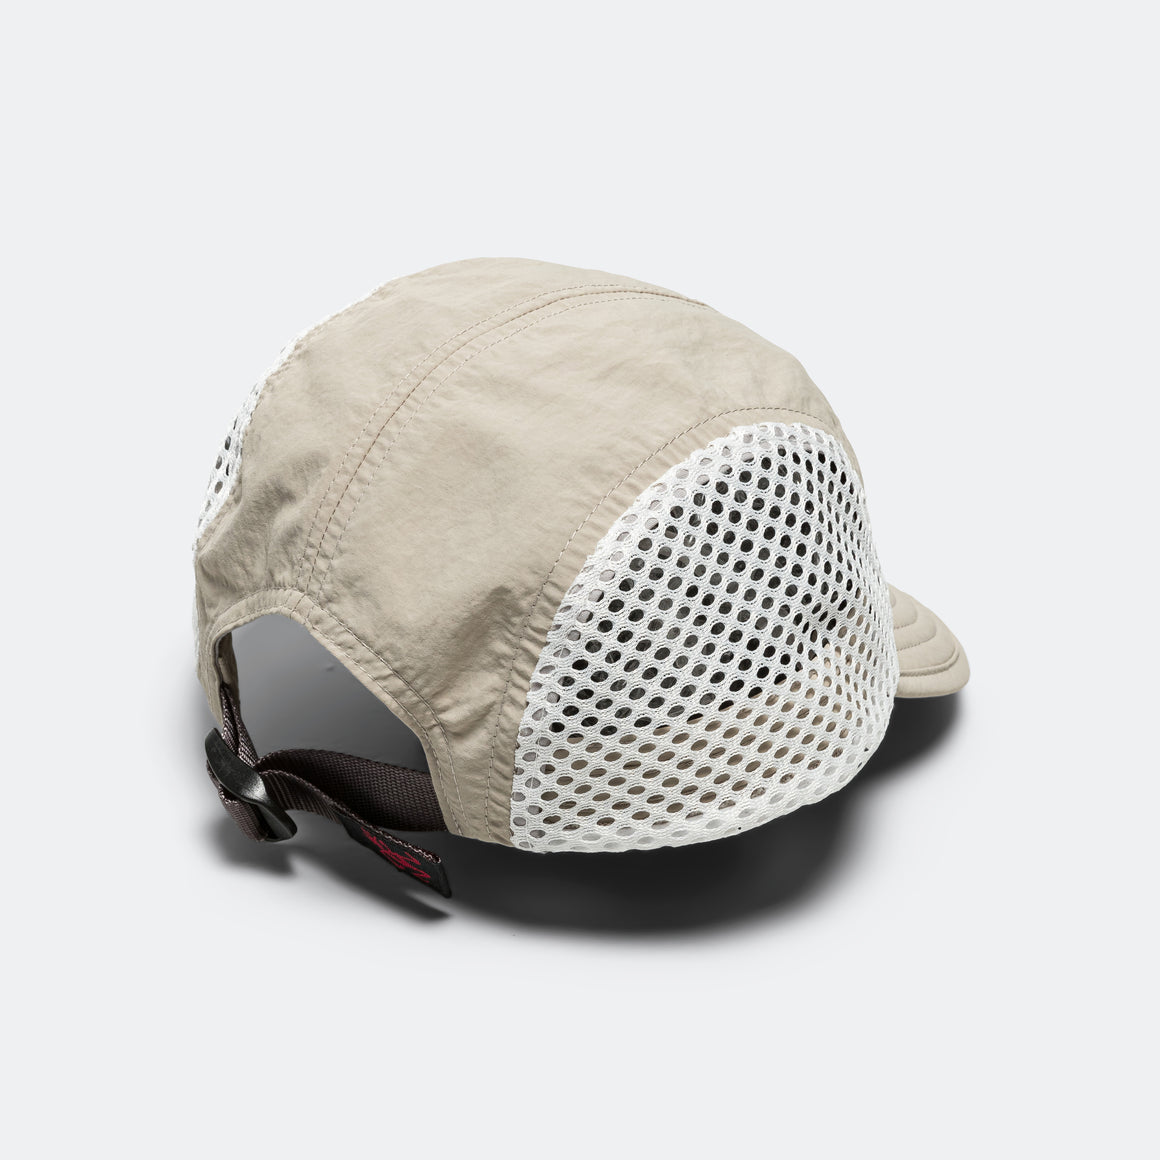 Gramicci - Mesh Cap - Sand - UP THERE